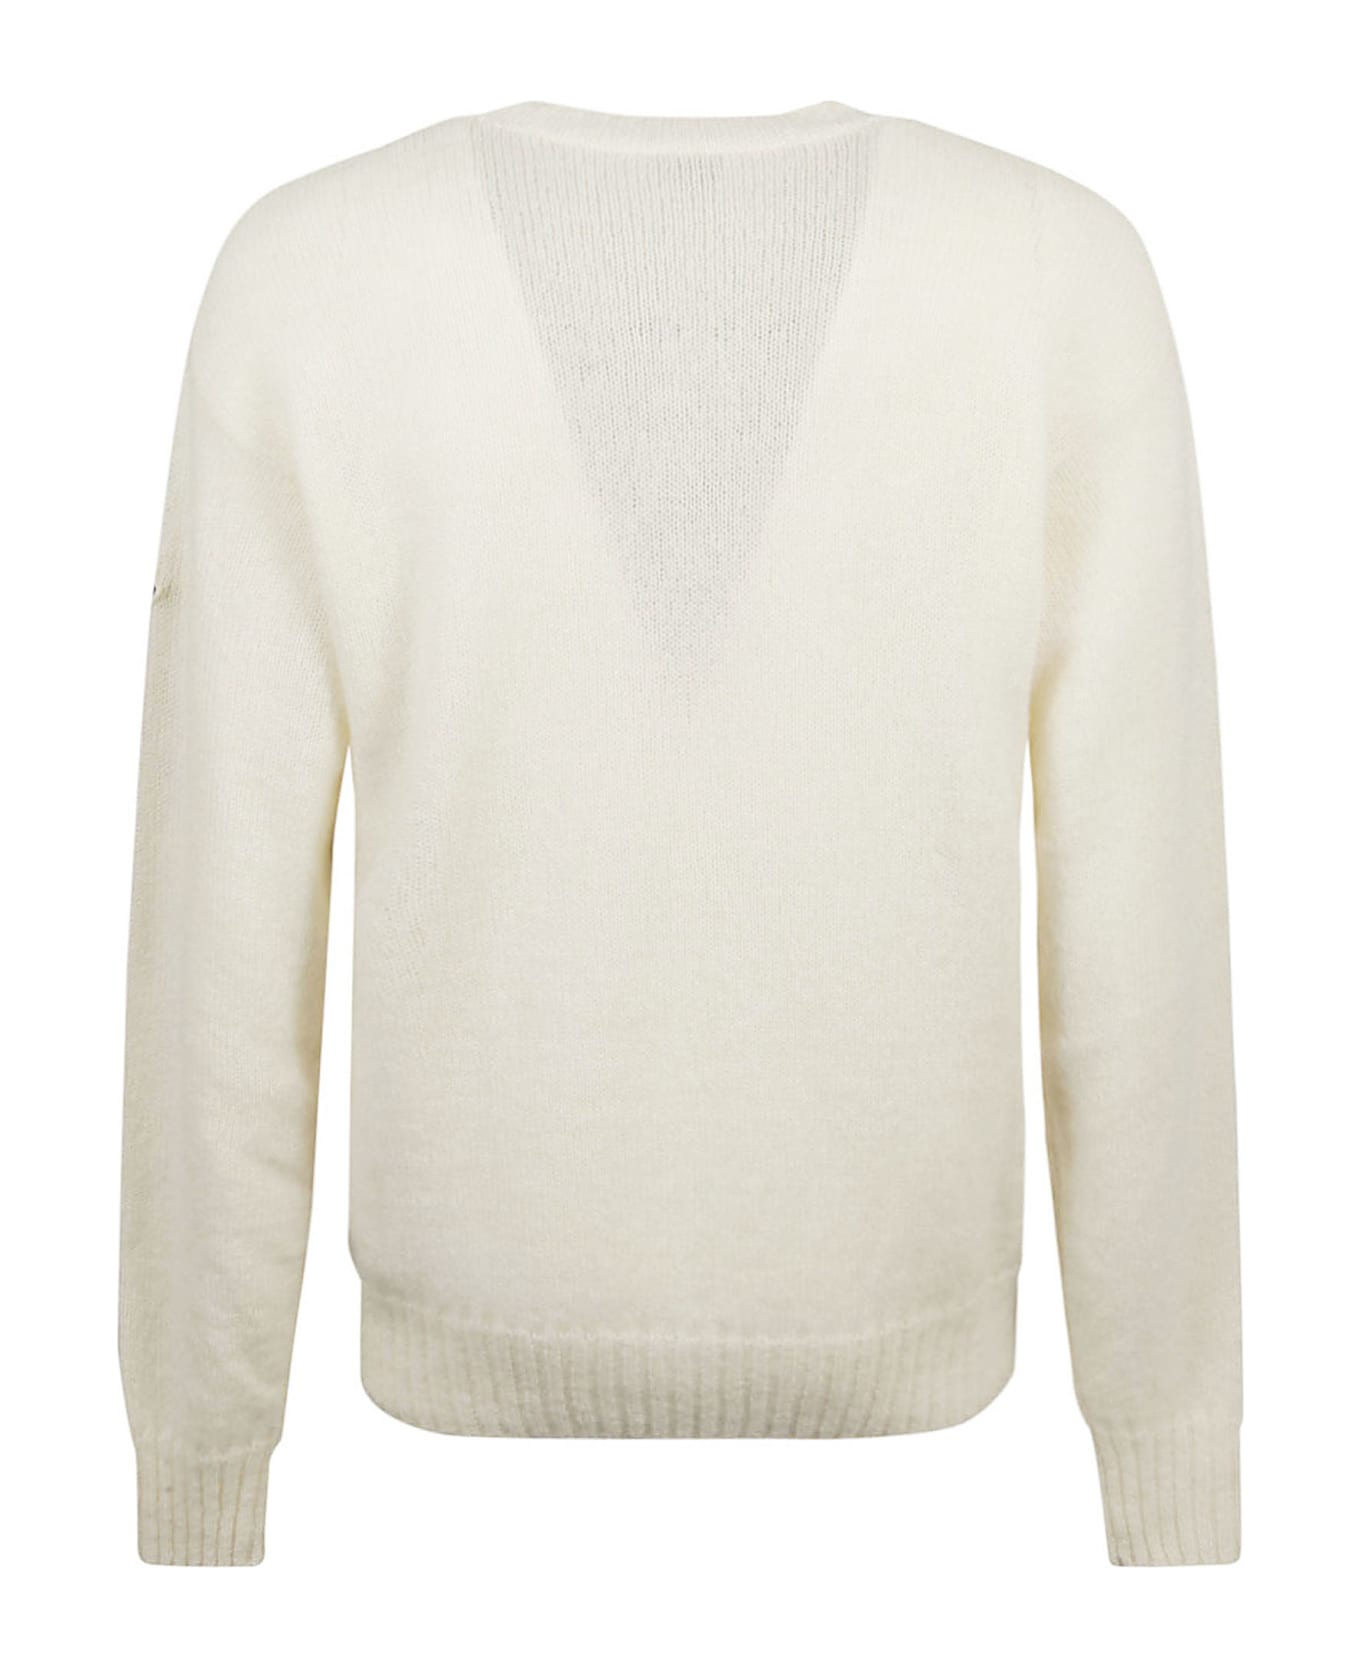 Moncler Embroidered Rib Knit Sweater - White